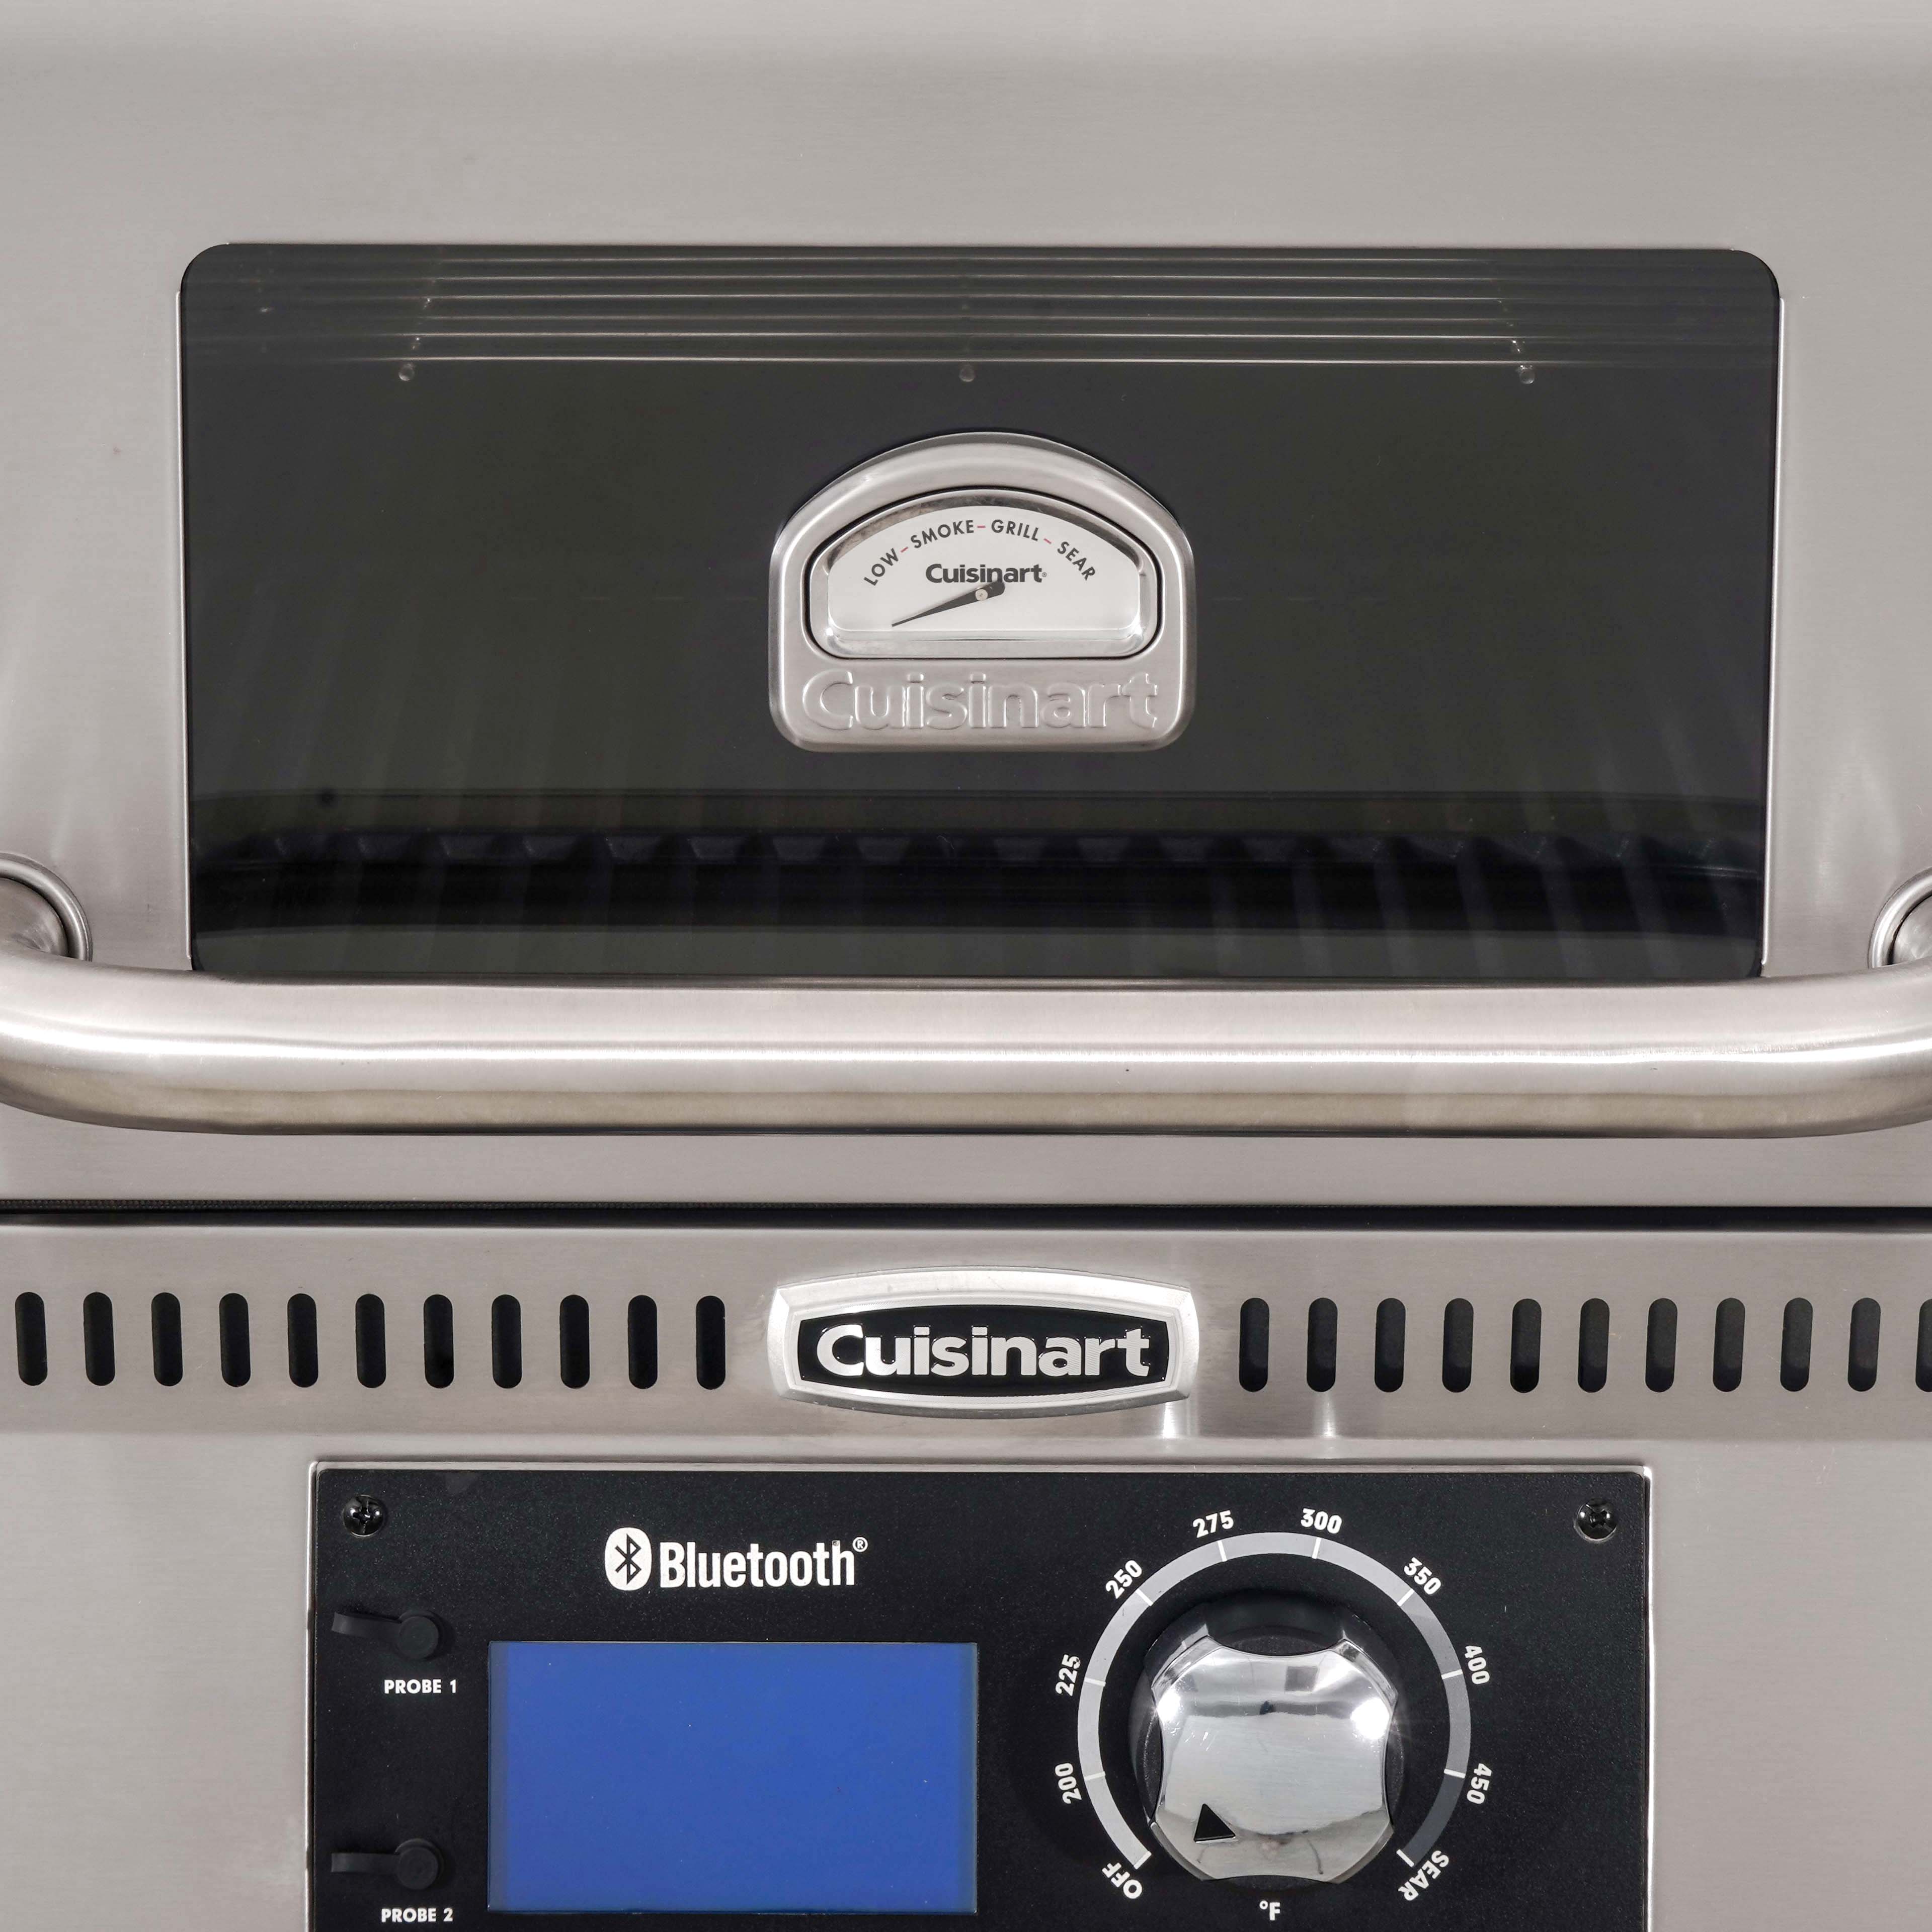 Cuisinart Bristol Bluetooth Connectivity Smoker and Pellet Grill - image 5 of 14